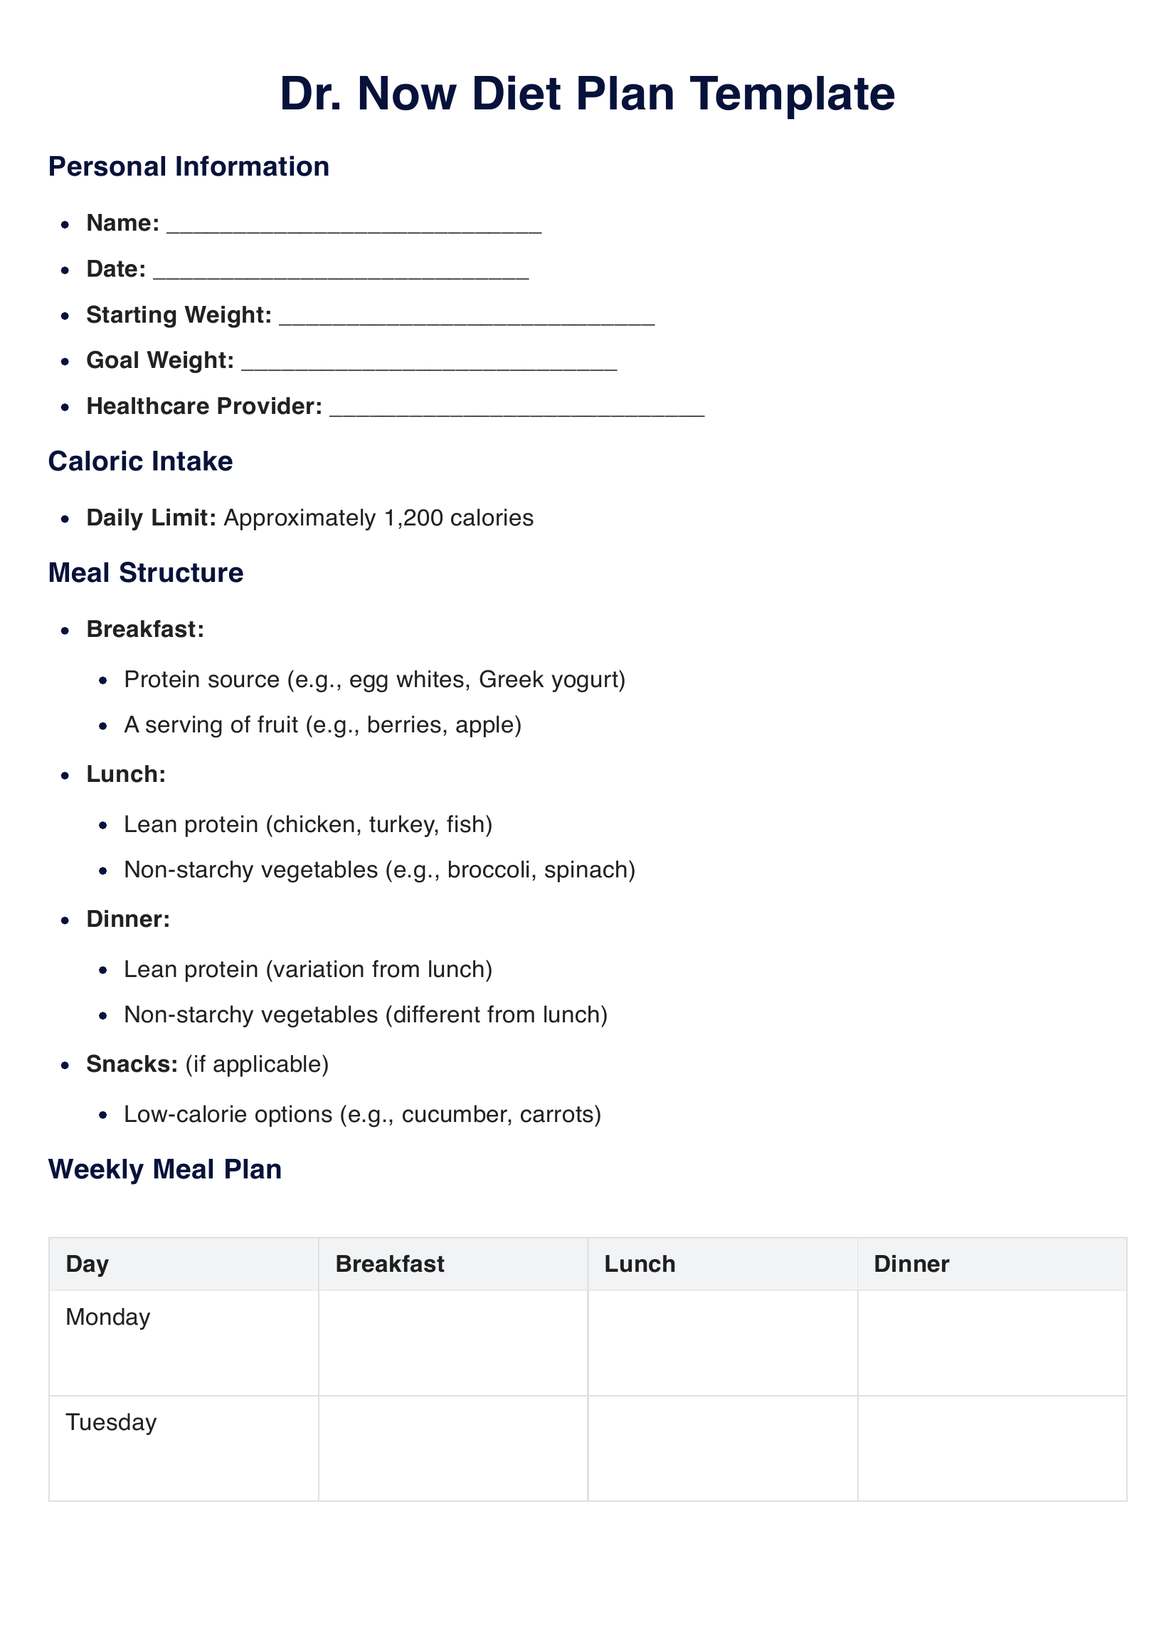 Dr Now Diet Plan PDF Example